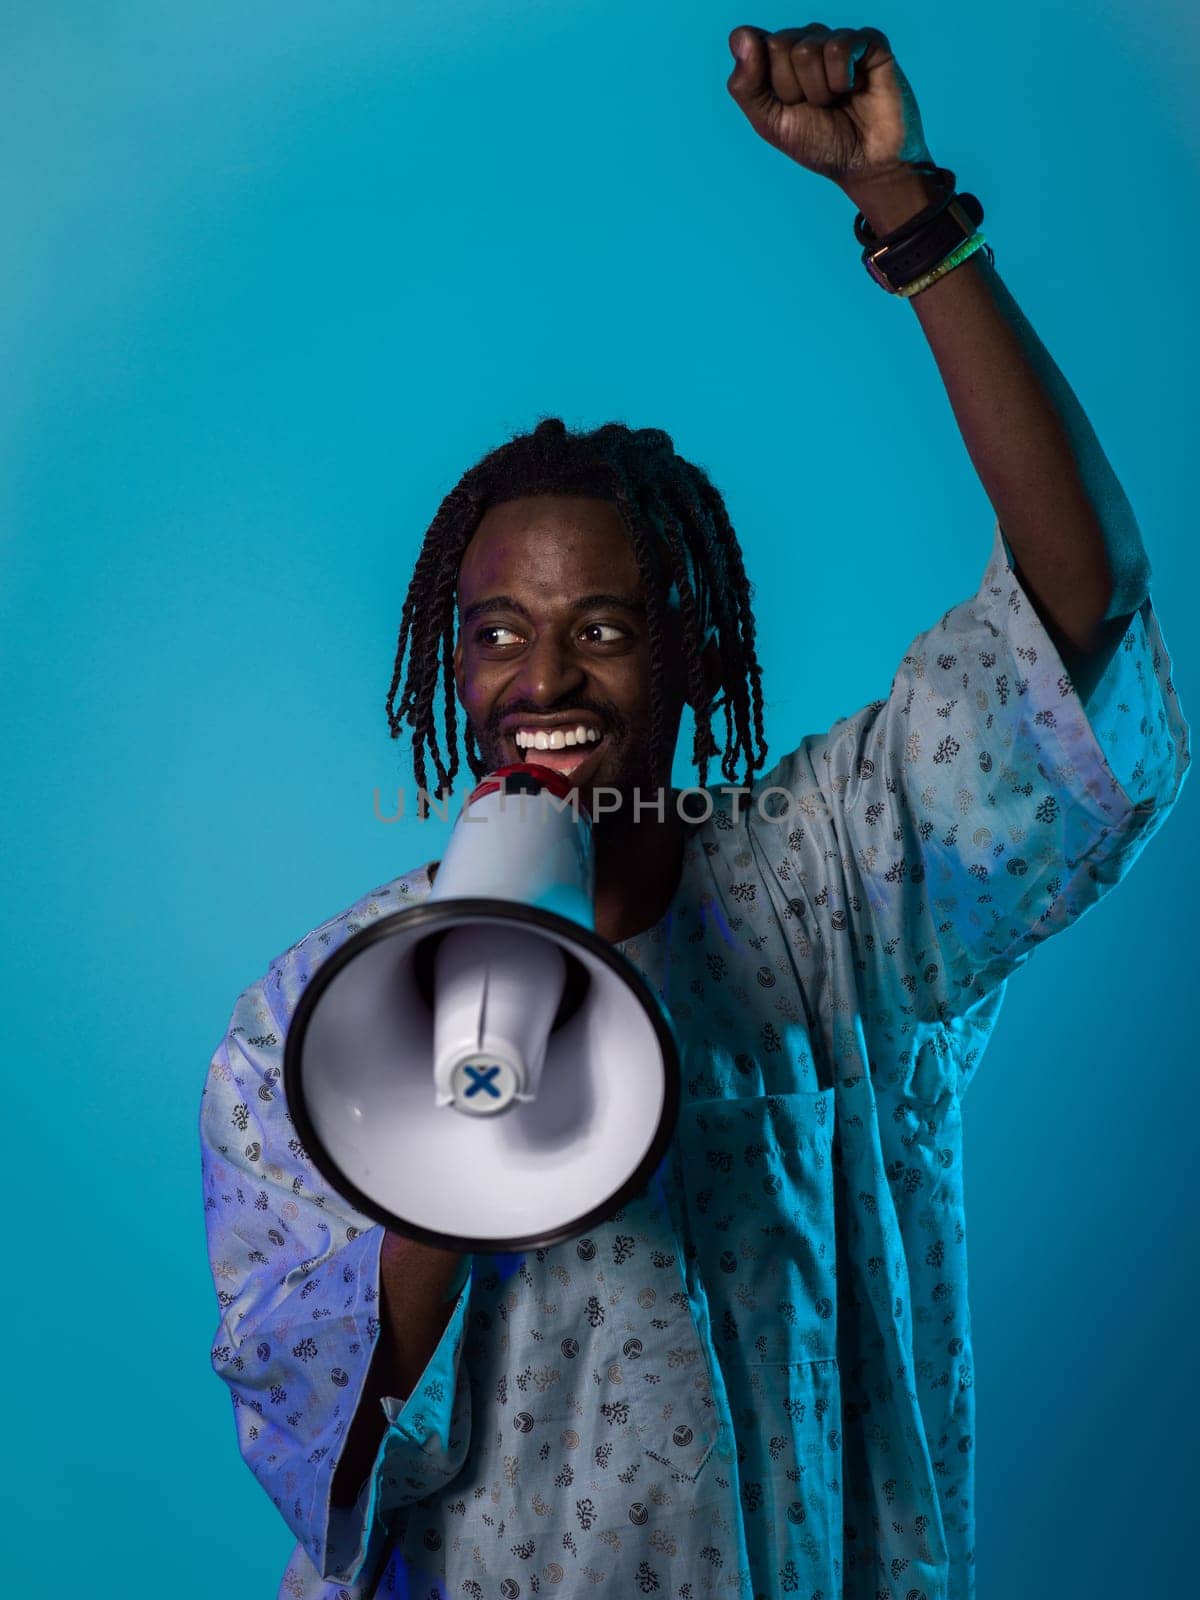 In a powerful and symbolic image, an African American man wears traditional clothing, passionately wields a megaphone against a striking blue background, with his hand raised in the air symbolizing his vocal and cultural empowerment in the pursuit of social justice and equality by dotshock